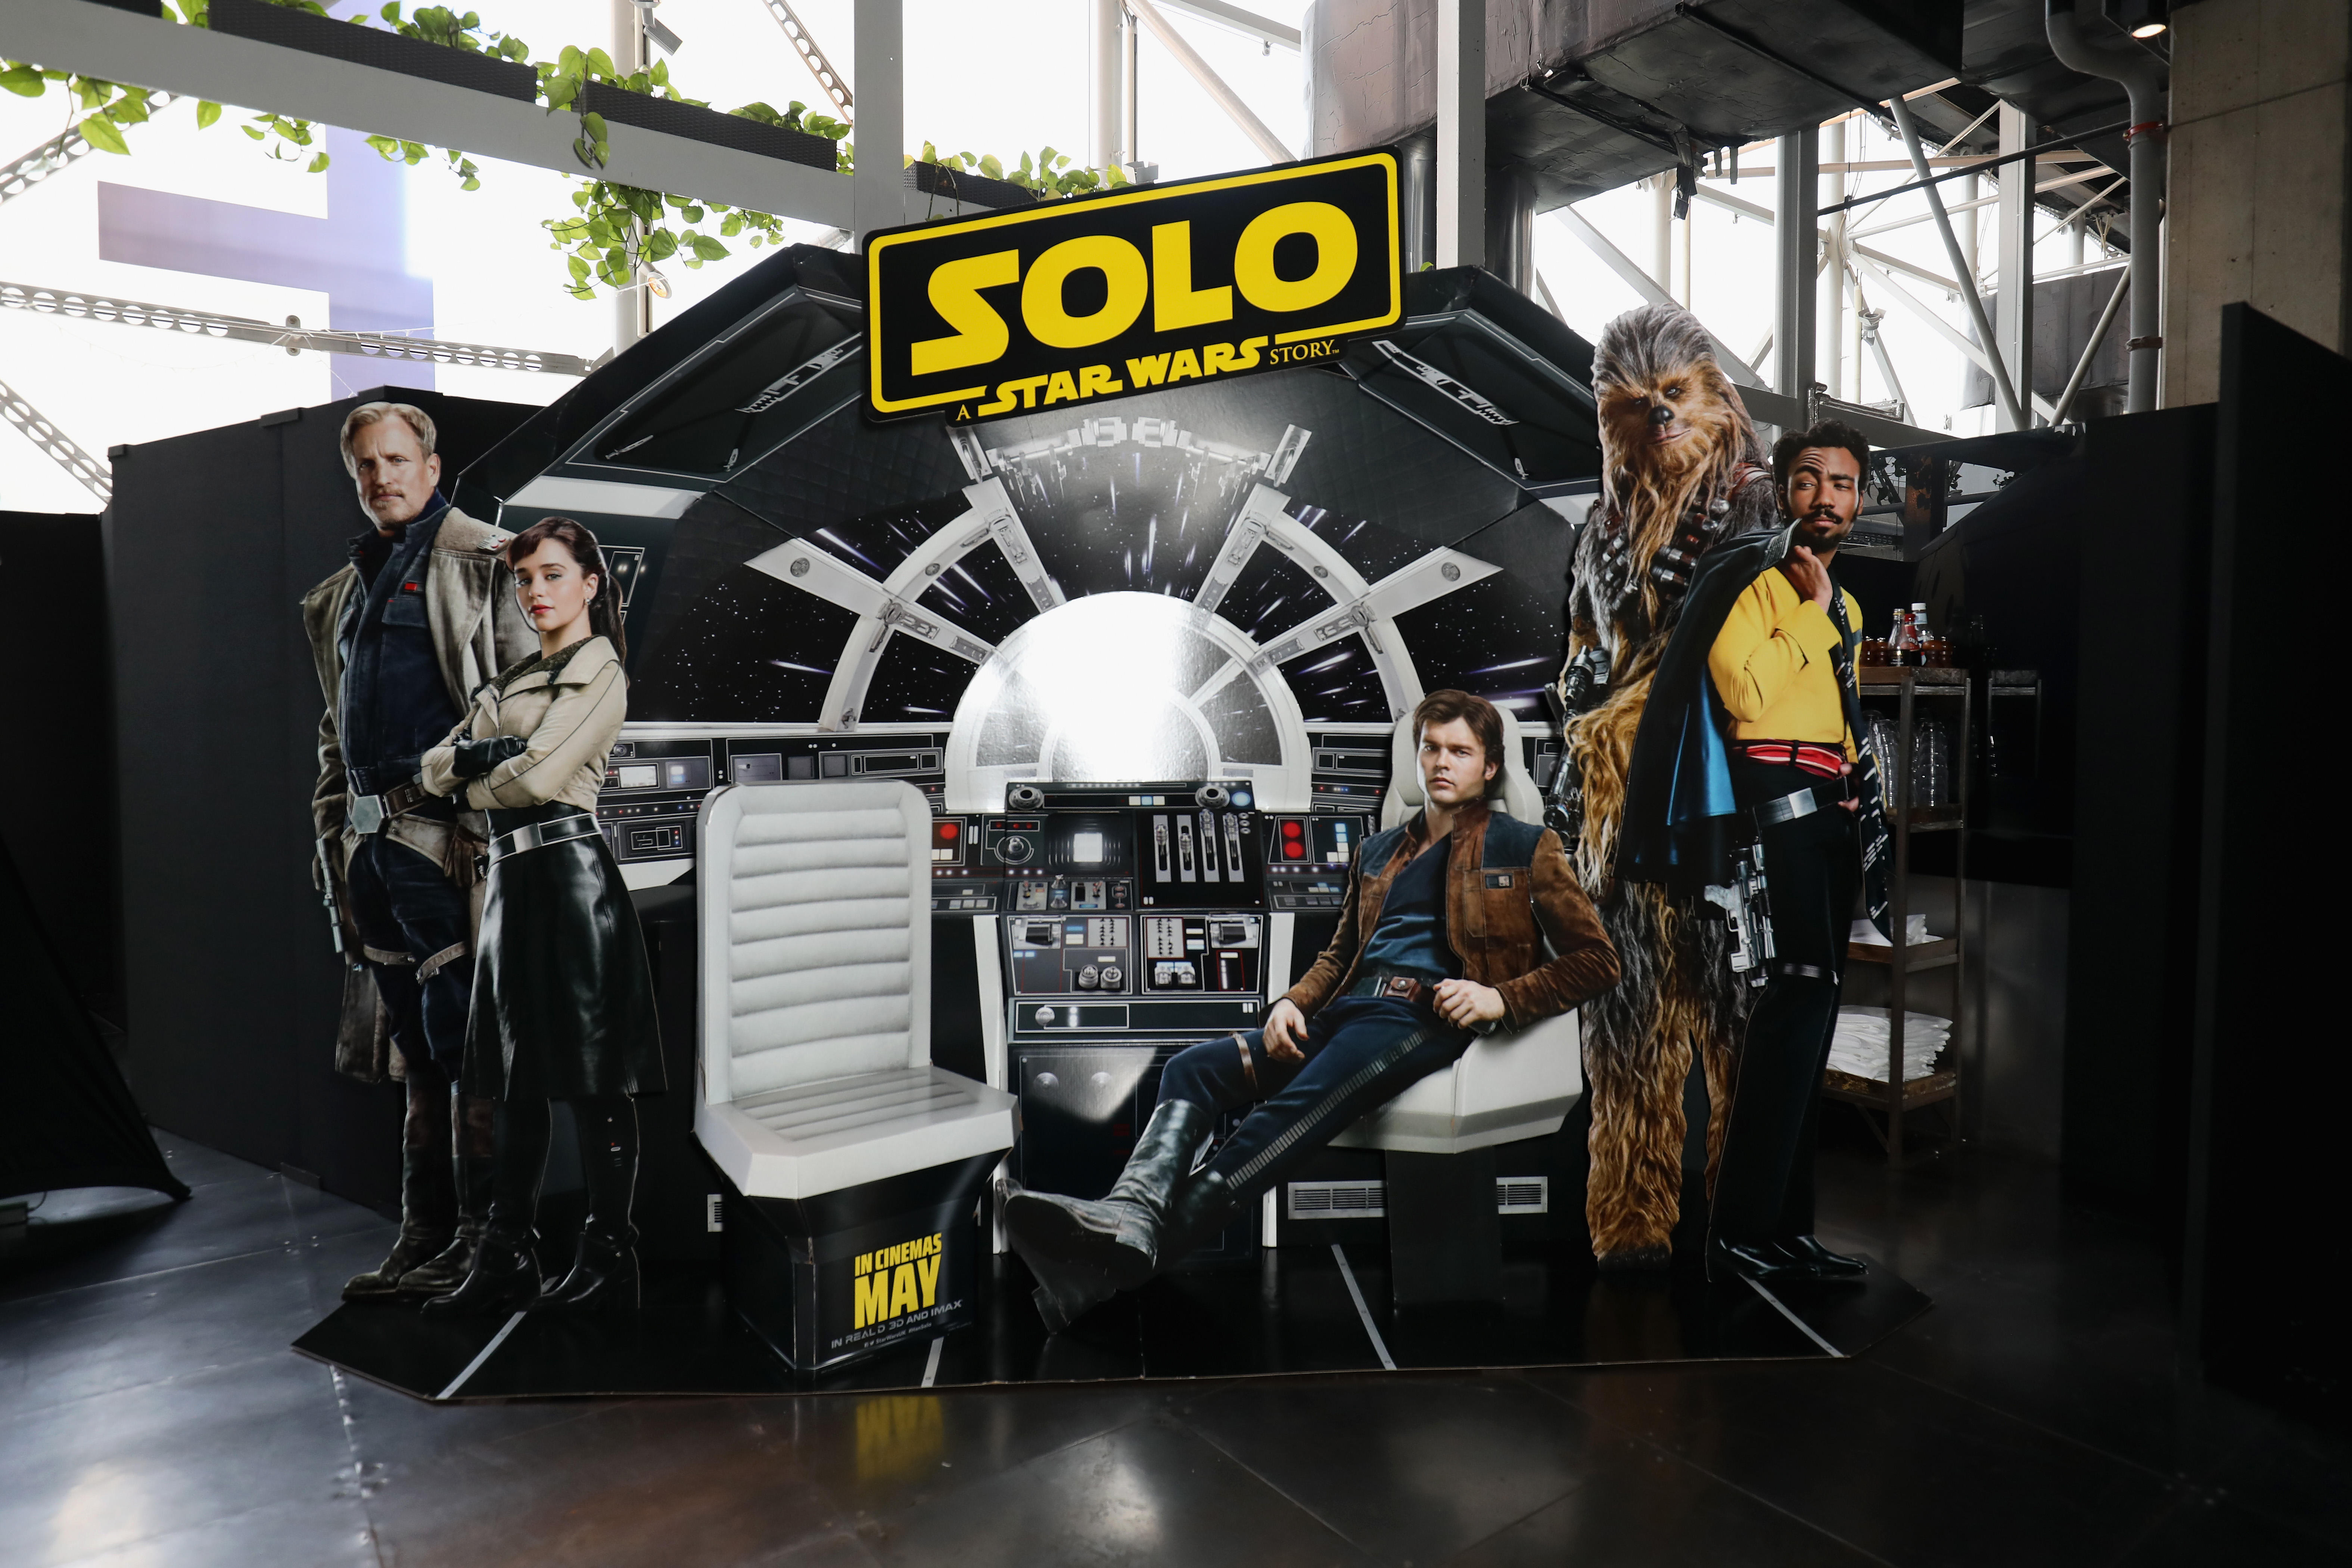 "Solo" may blaze new trail for Disney Losing money for "Star Wars